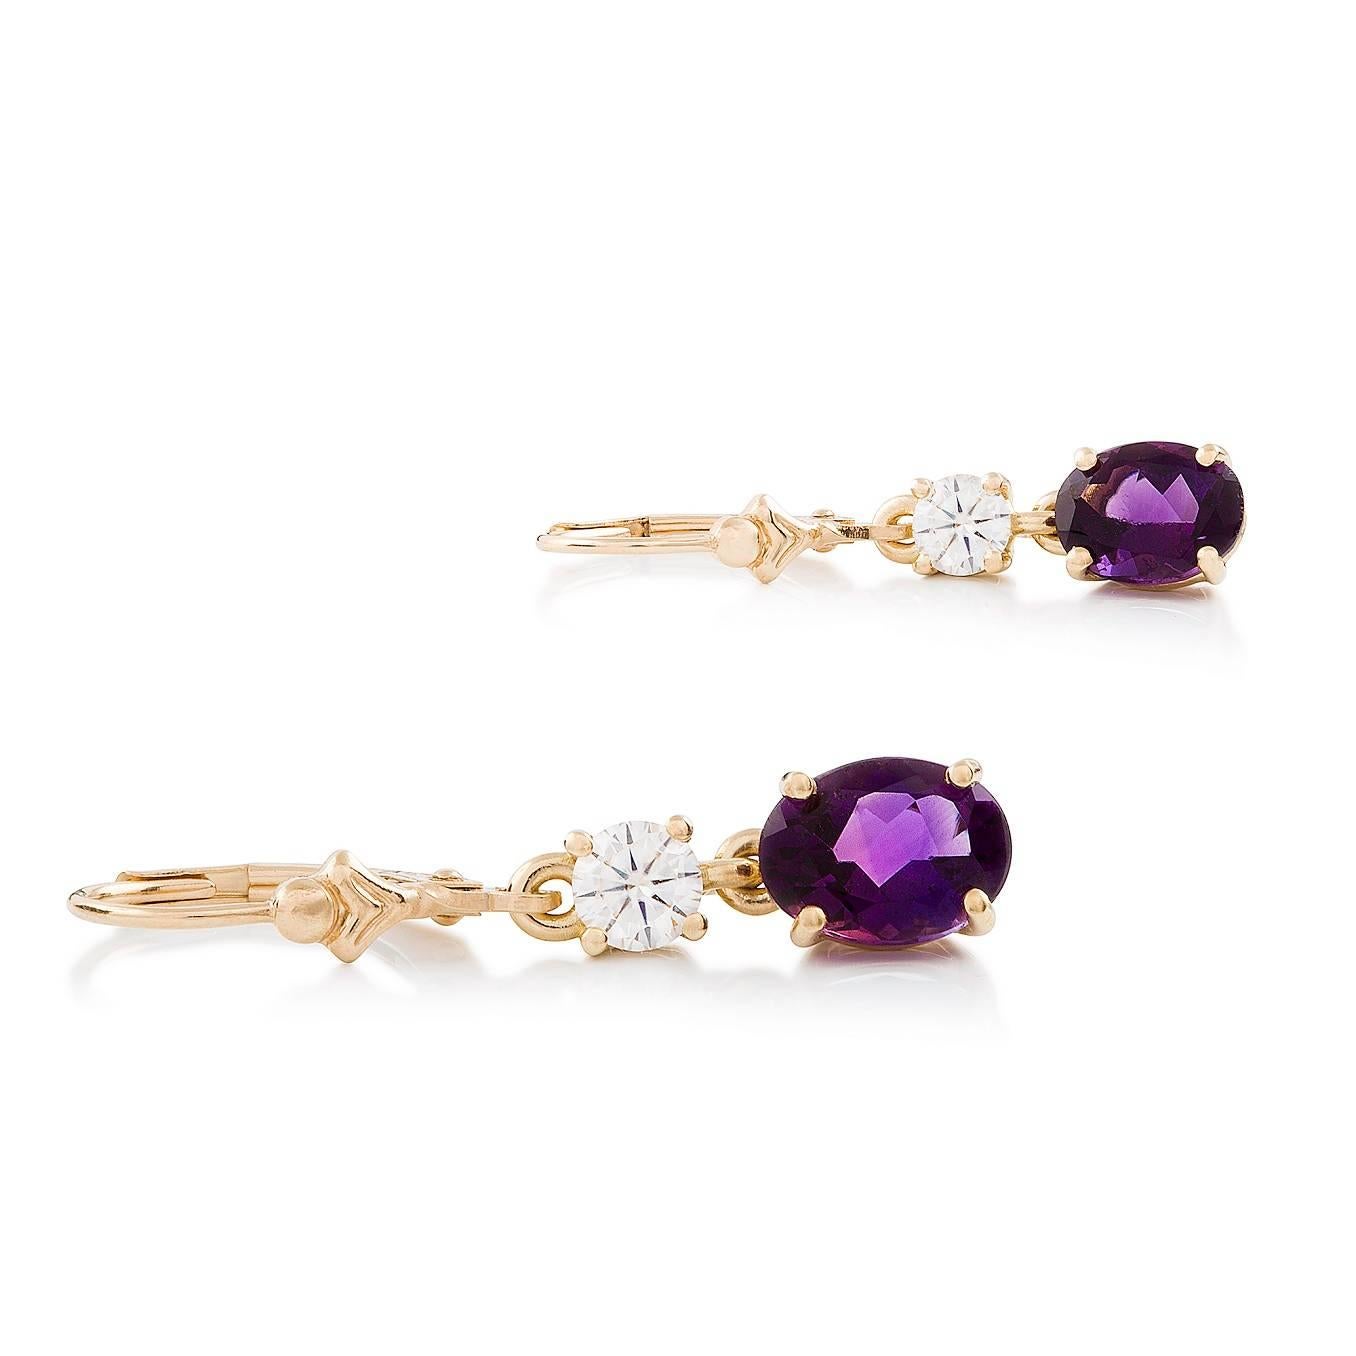 Ametista Diamante Earrings

These gorgeous earrings in 18ct yellow gold feature a pair of lovely amethysts each suspended from a petite finest white diamond and ultra-safe lever back earring findings.

Oval faceted amethysts: medium purple colour,